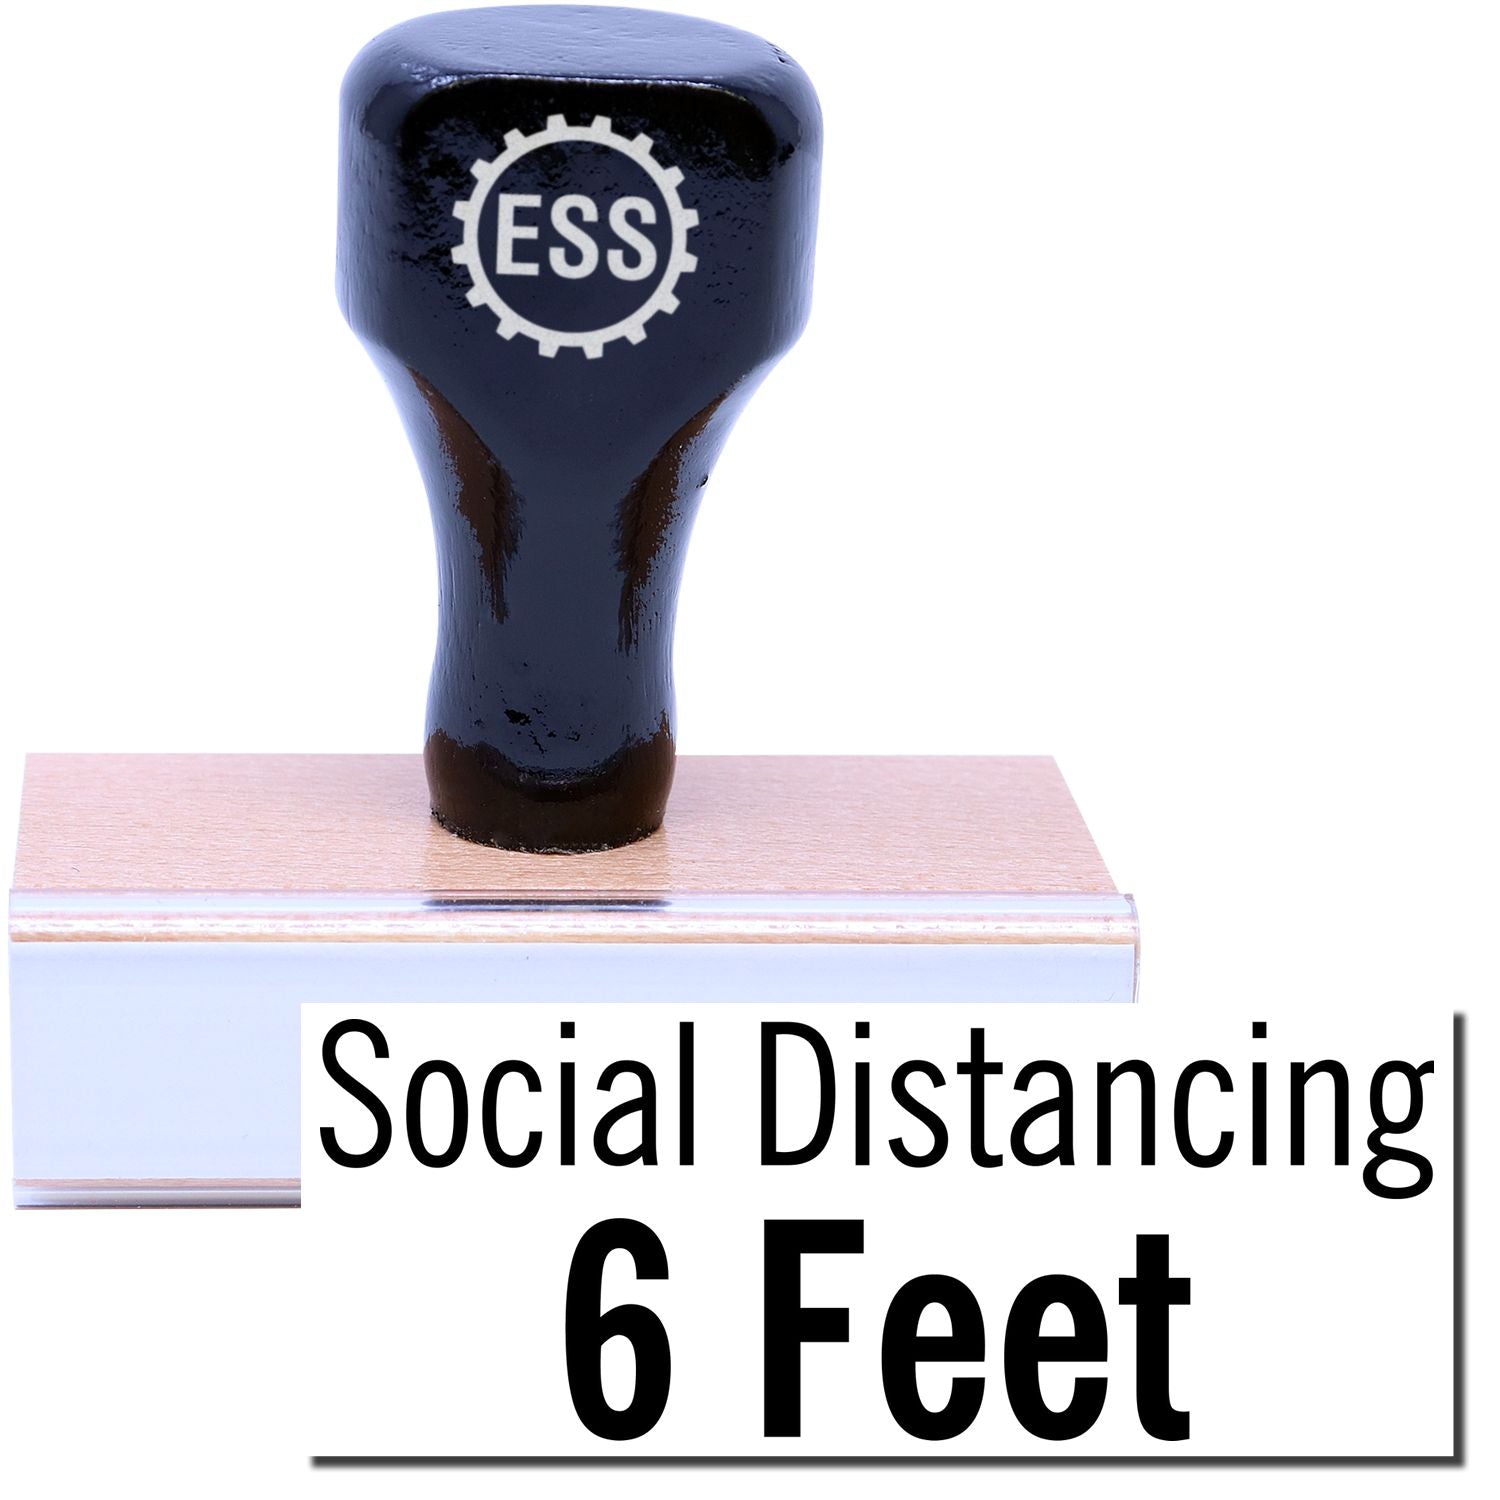 A stock office rubber stamp with a stamped image showing how the text "Social Distancing 6 Feet" in a large font is displayed after stamping.